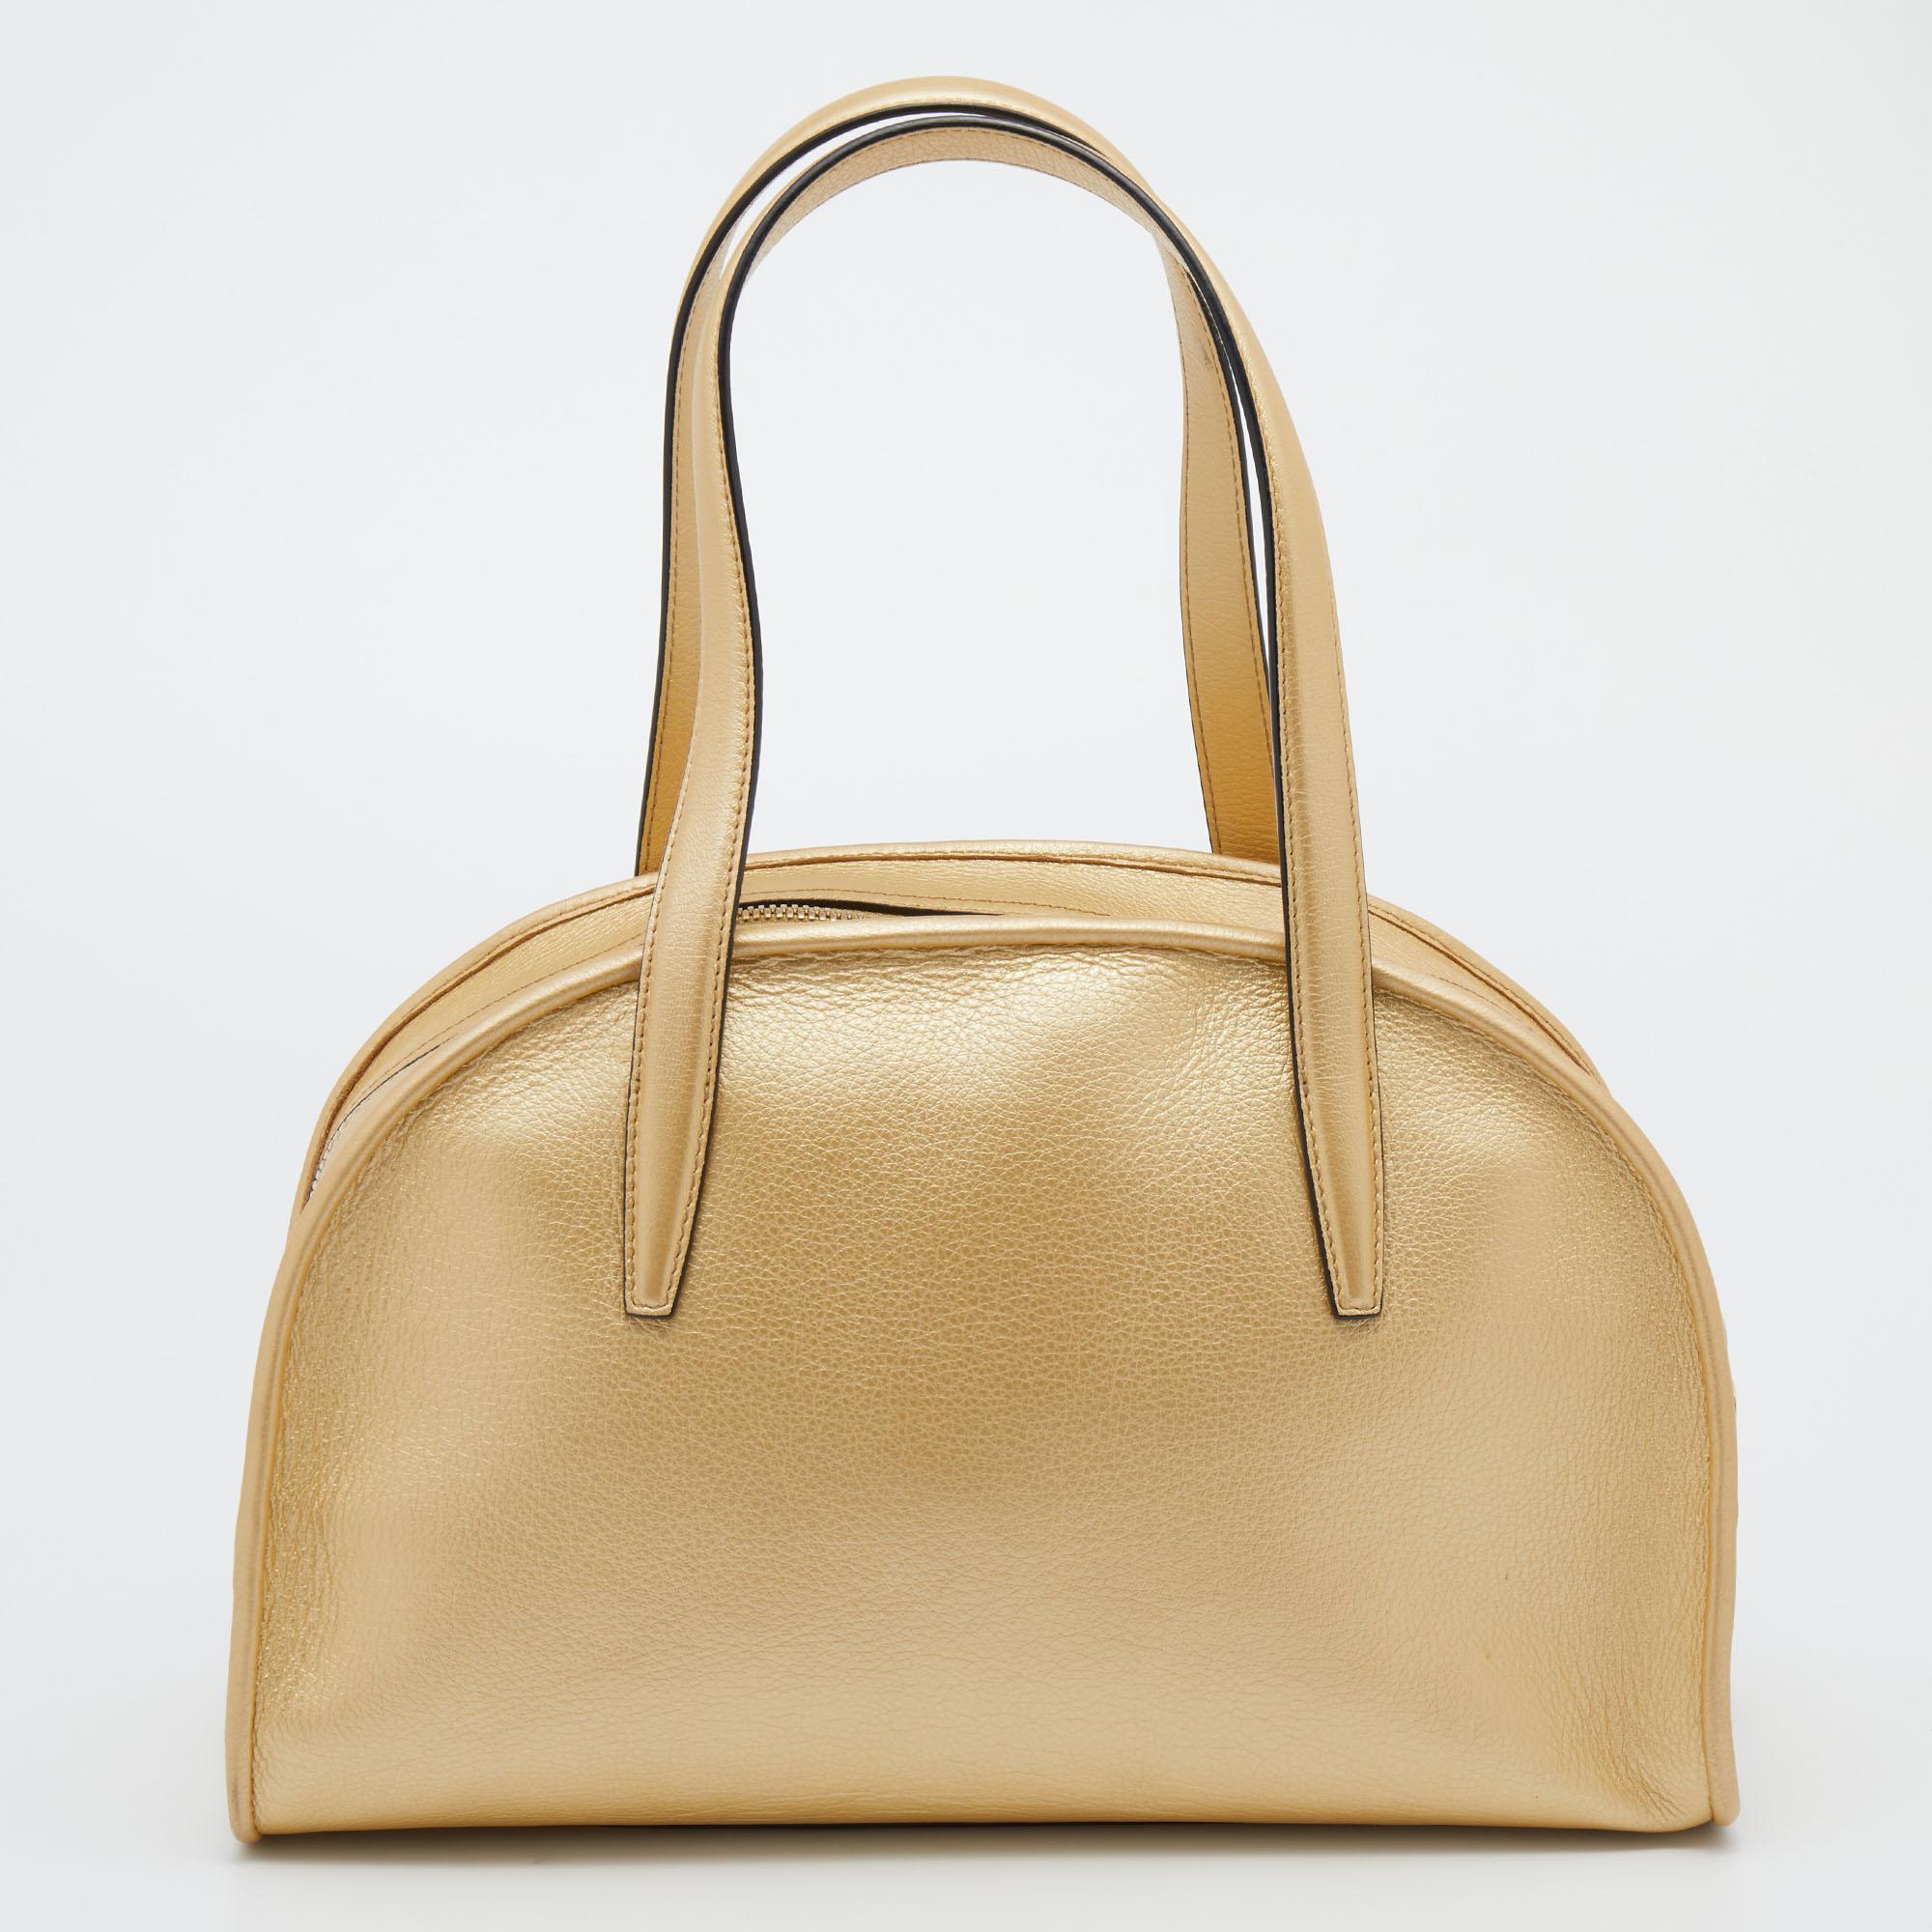 This stunning satchel from Loewe is comfortable to carry without compromising on style. Crafted from metallic gold-hued leather, the bag comes with dual handles and matching gold-tone hardware. The interior houses ample space for your essential